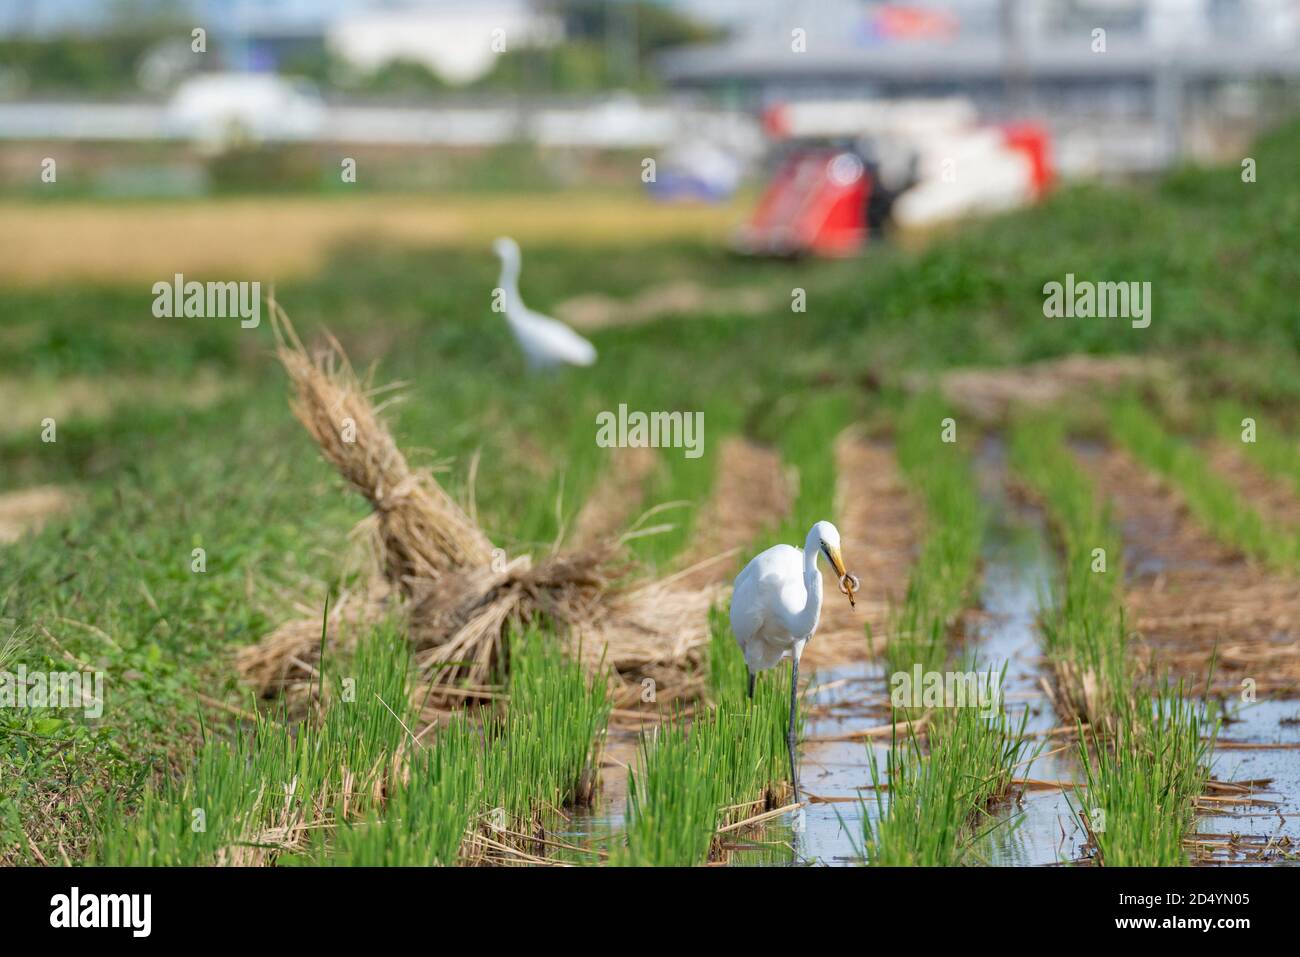 Egret at autumn rice field after harvest, searching and eating Pond loach (Misgurnus anguillicaudatus), Isehara City, Kanagawa Prefecture, Japan. Stock Photo